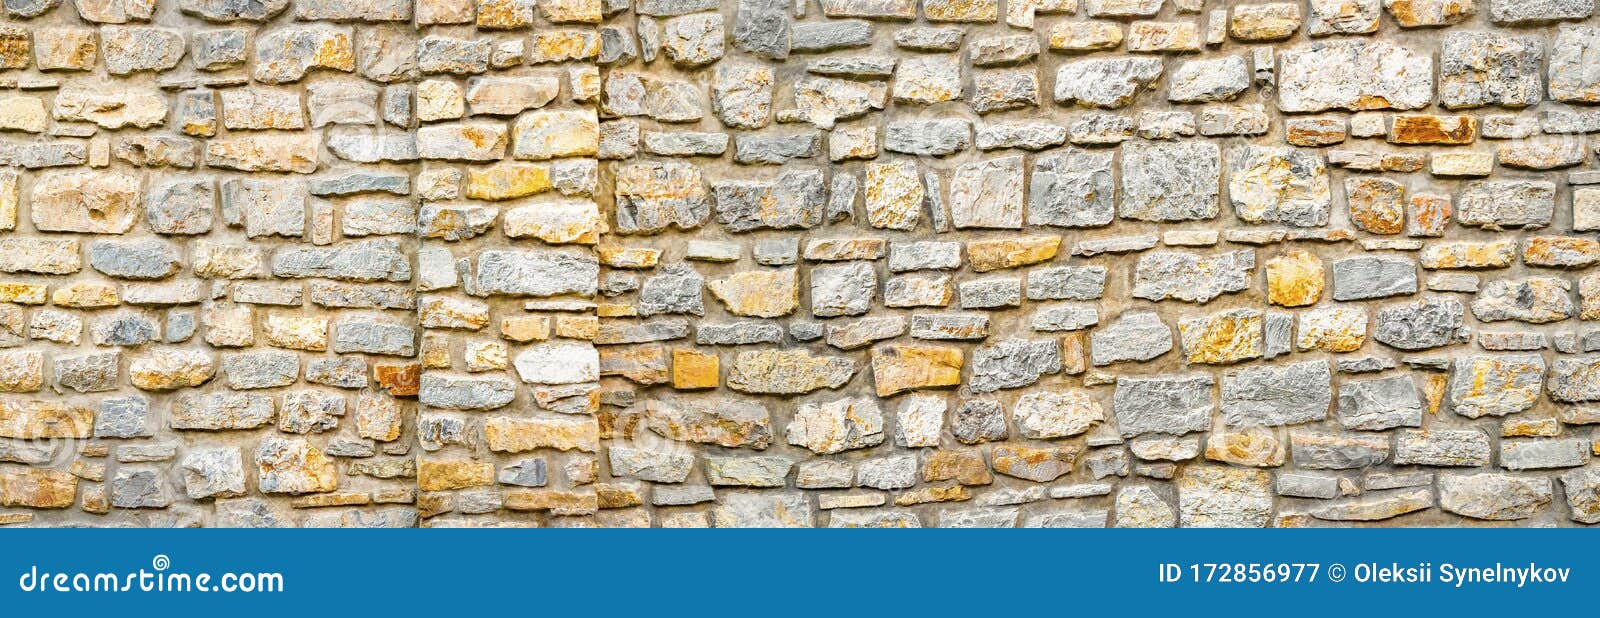 Stone Wall Banner. Wall of Stones As a Texture. Wall of Stones. Wall of a  Medieval Fortress with Mainly White or Light Stock Image - Image of size,  design: 172856977